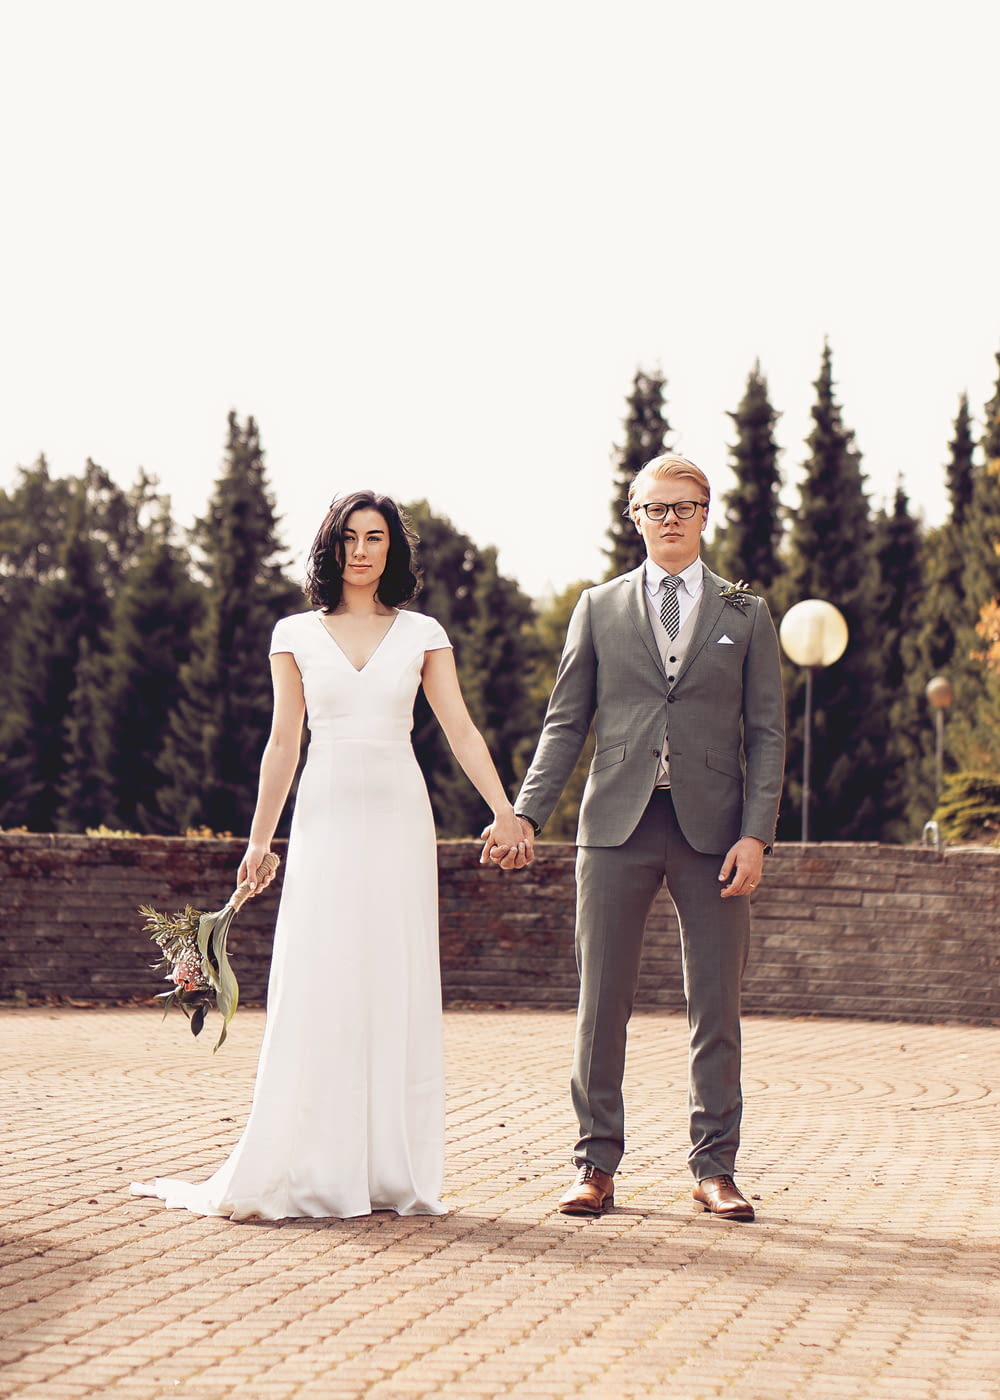 man in black suit and woman in white wedding dress standing on brown brick floor during